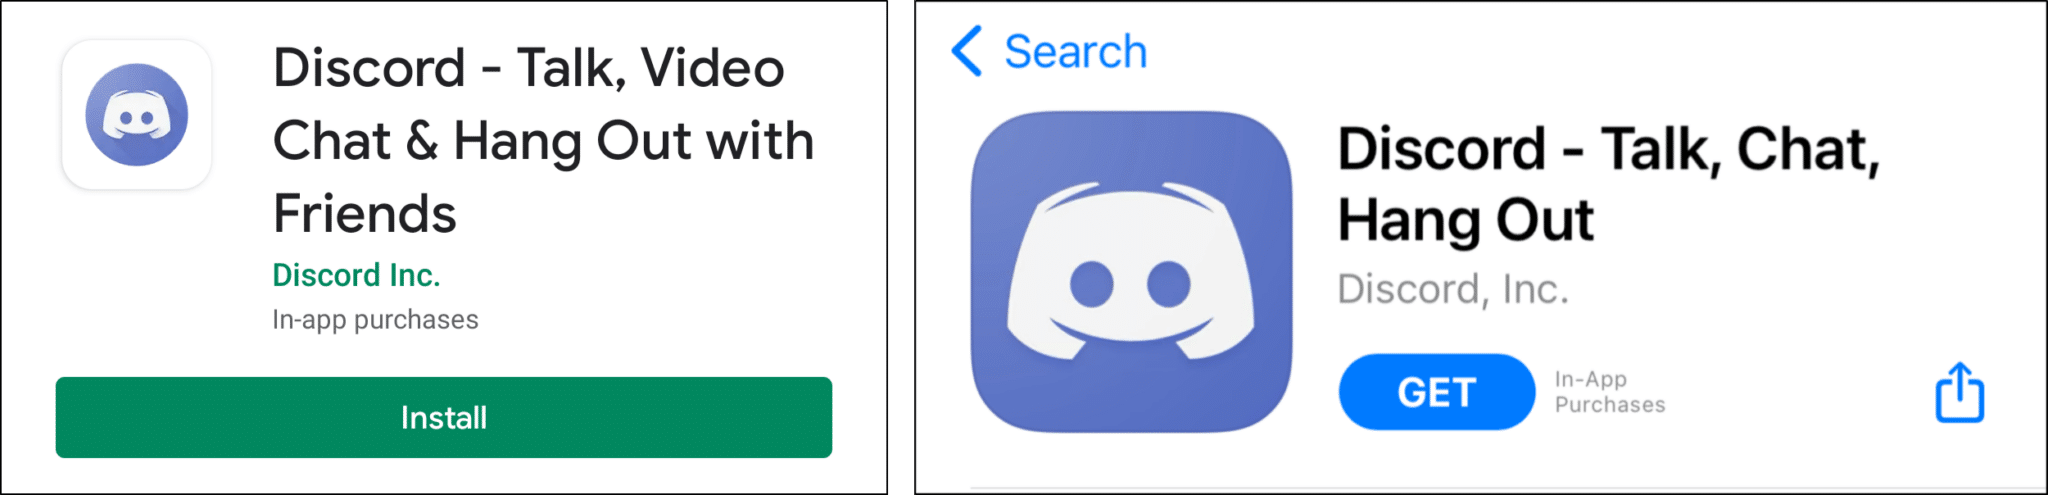 installing discord on Android, iPhone, and iPad